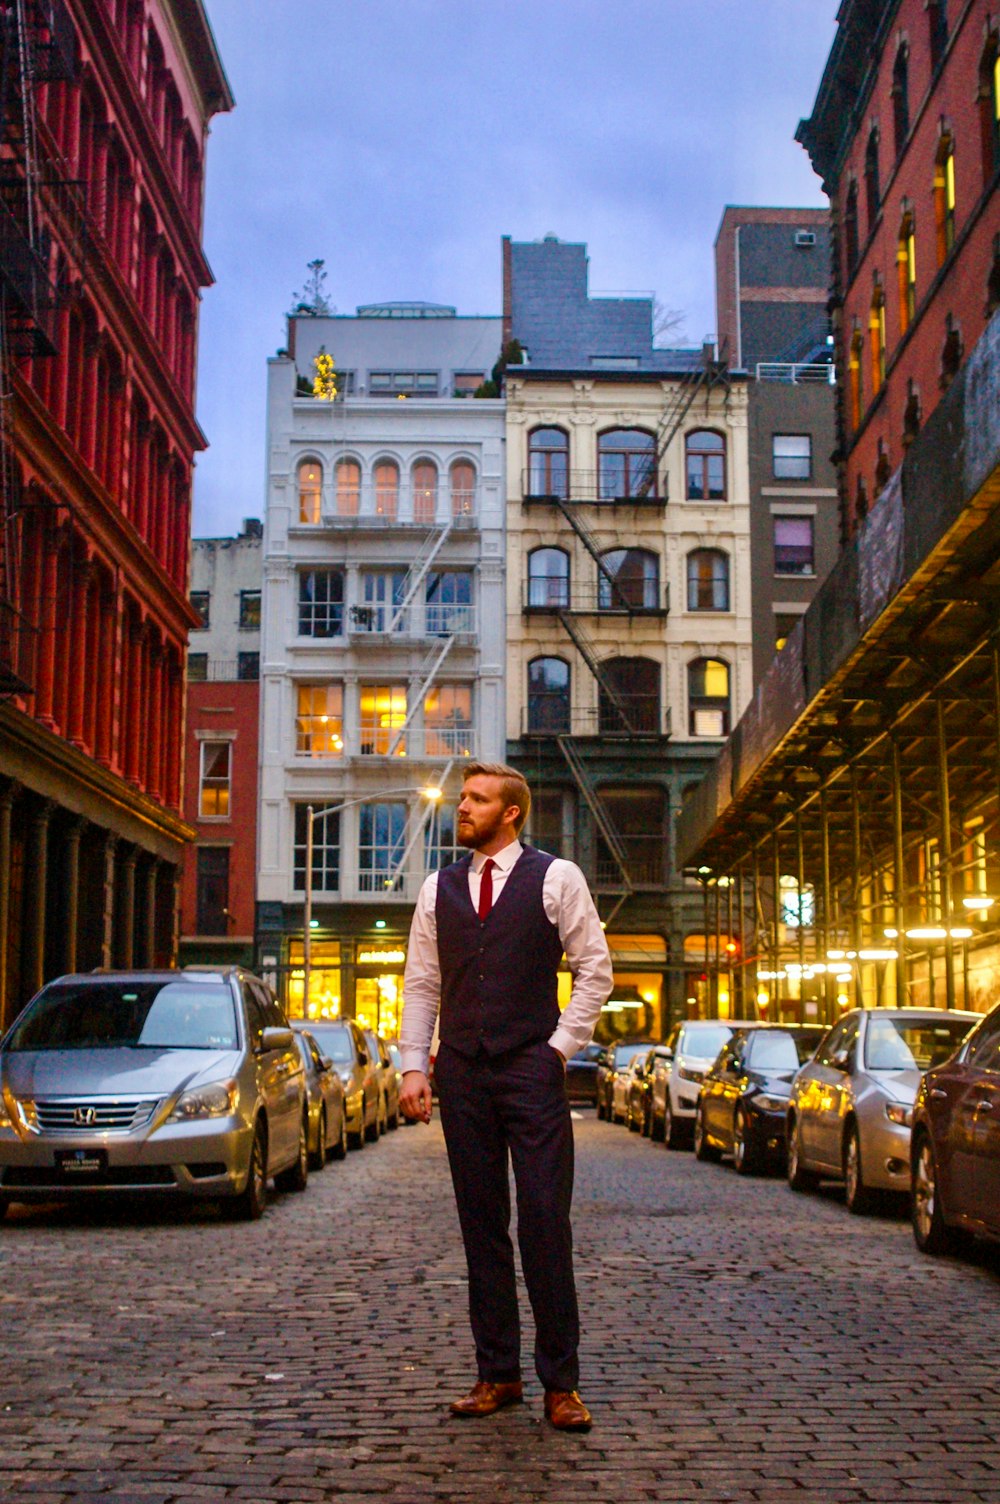 man in green suit standing near cars and buildings during night time